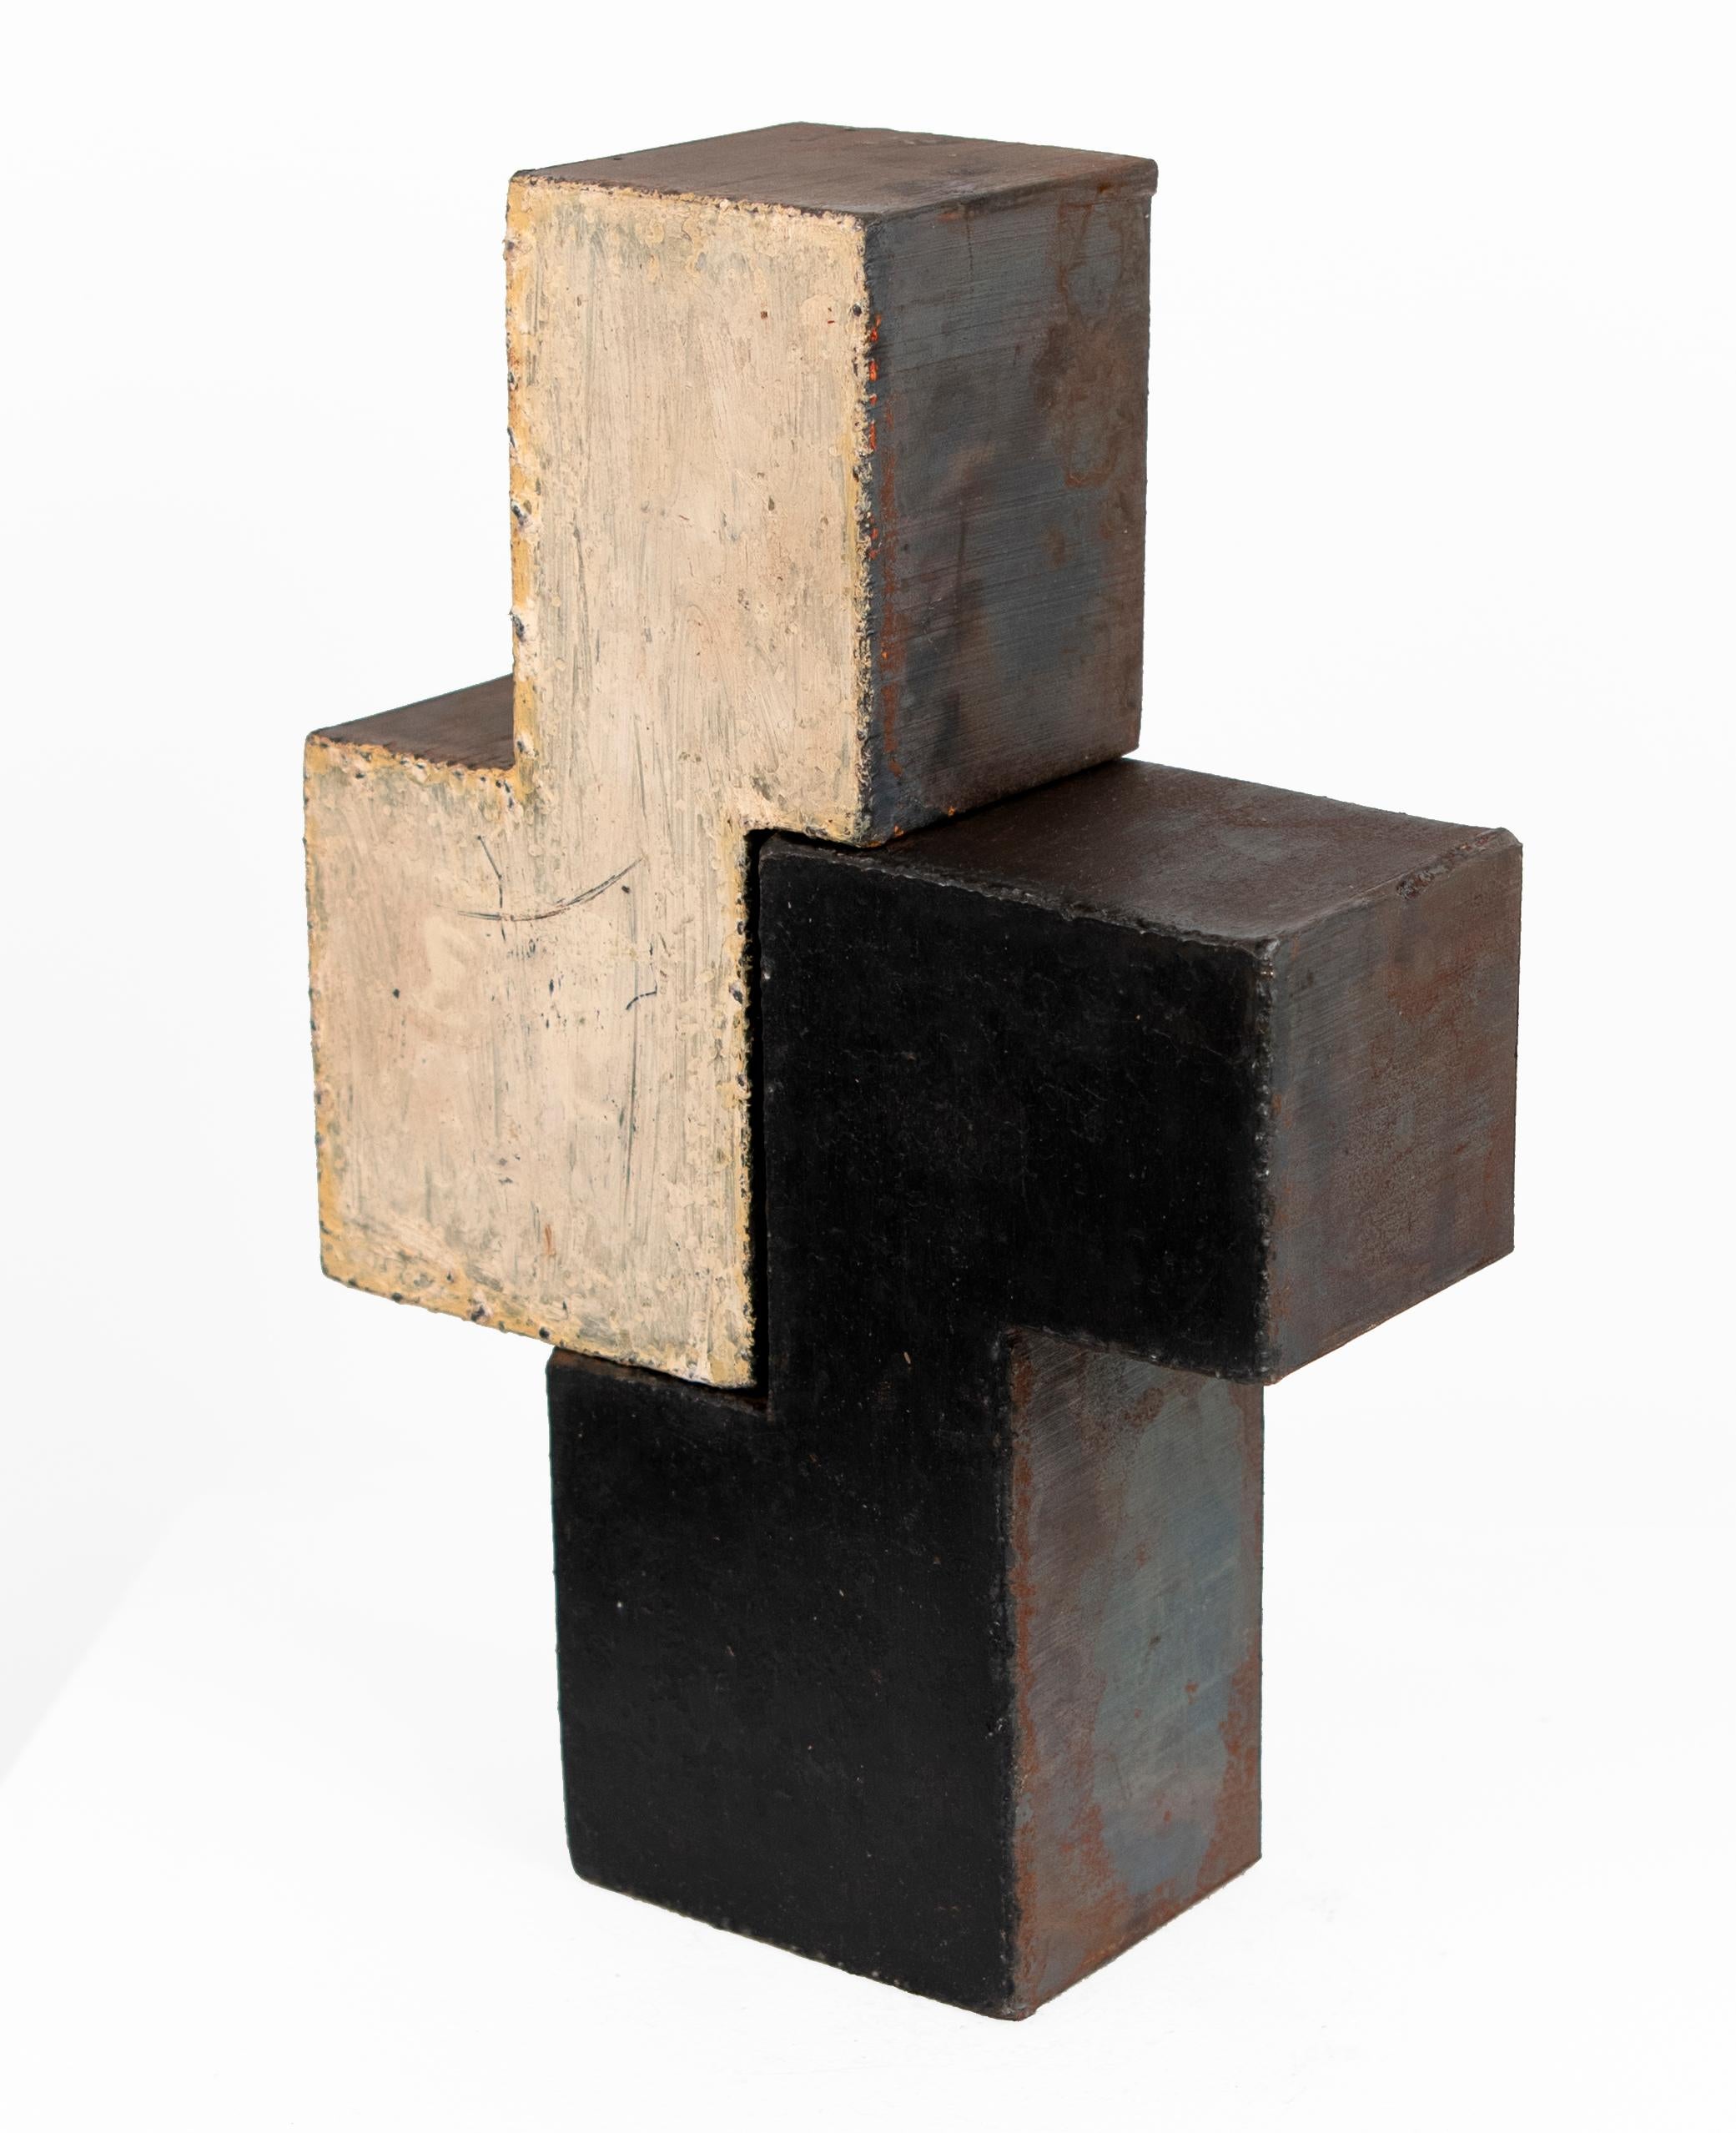 untitled sculpture (4) - Black Figurative Sculpture by Jonathan Waters